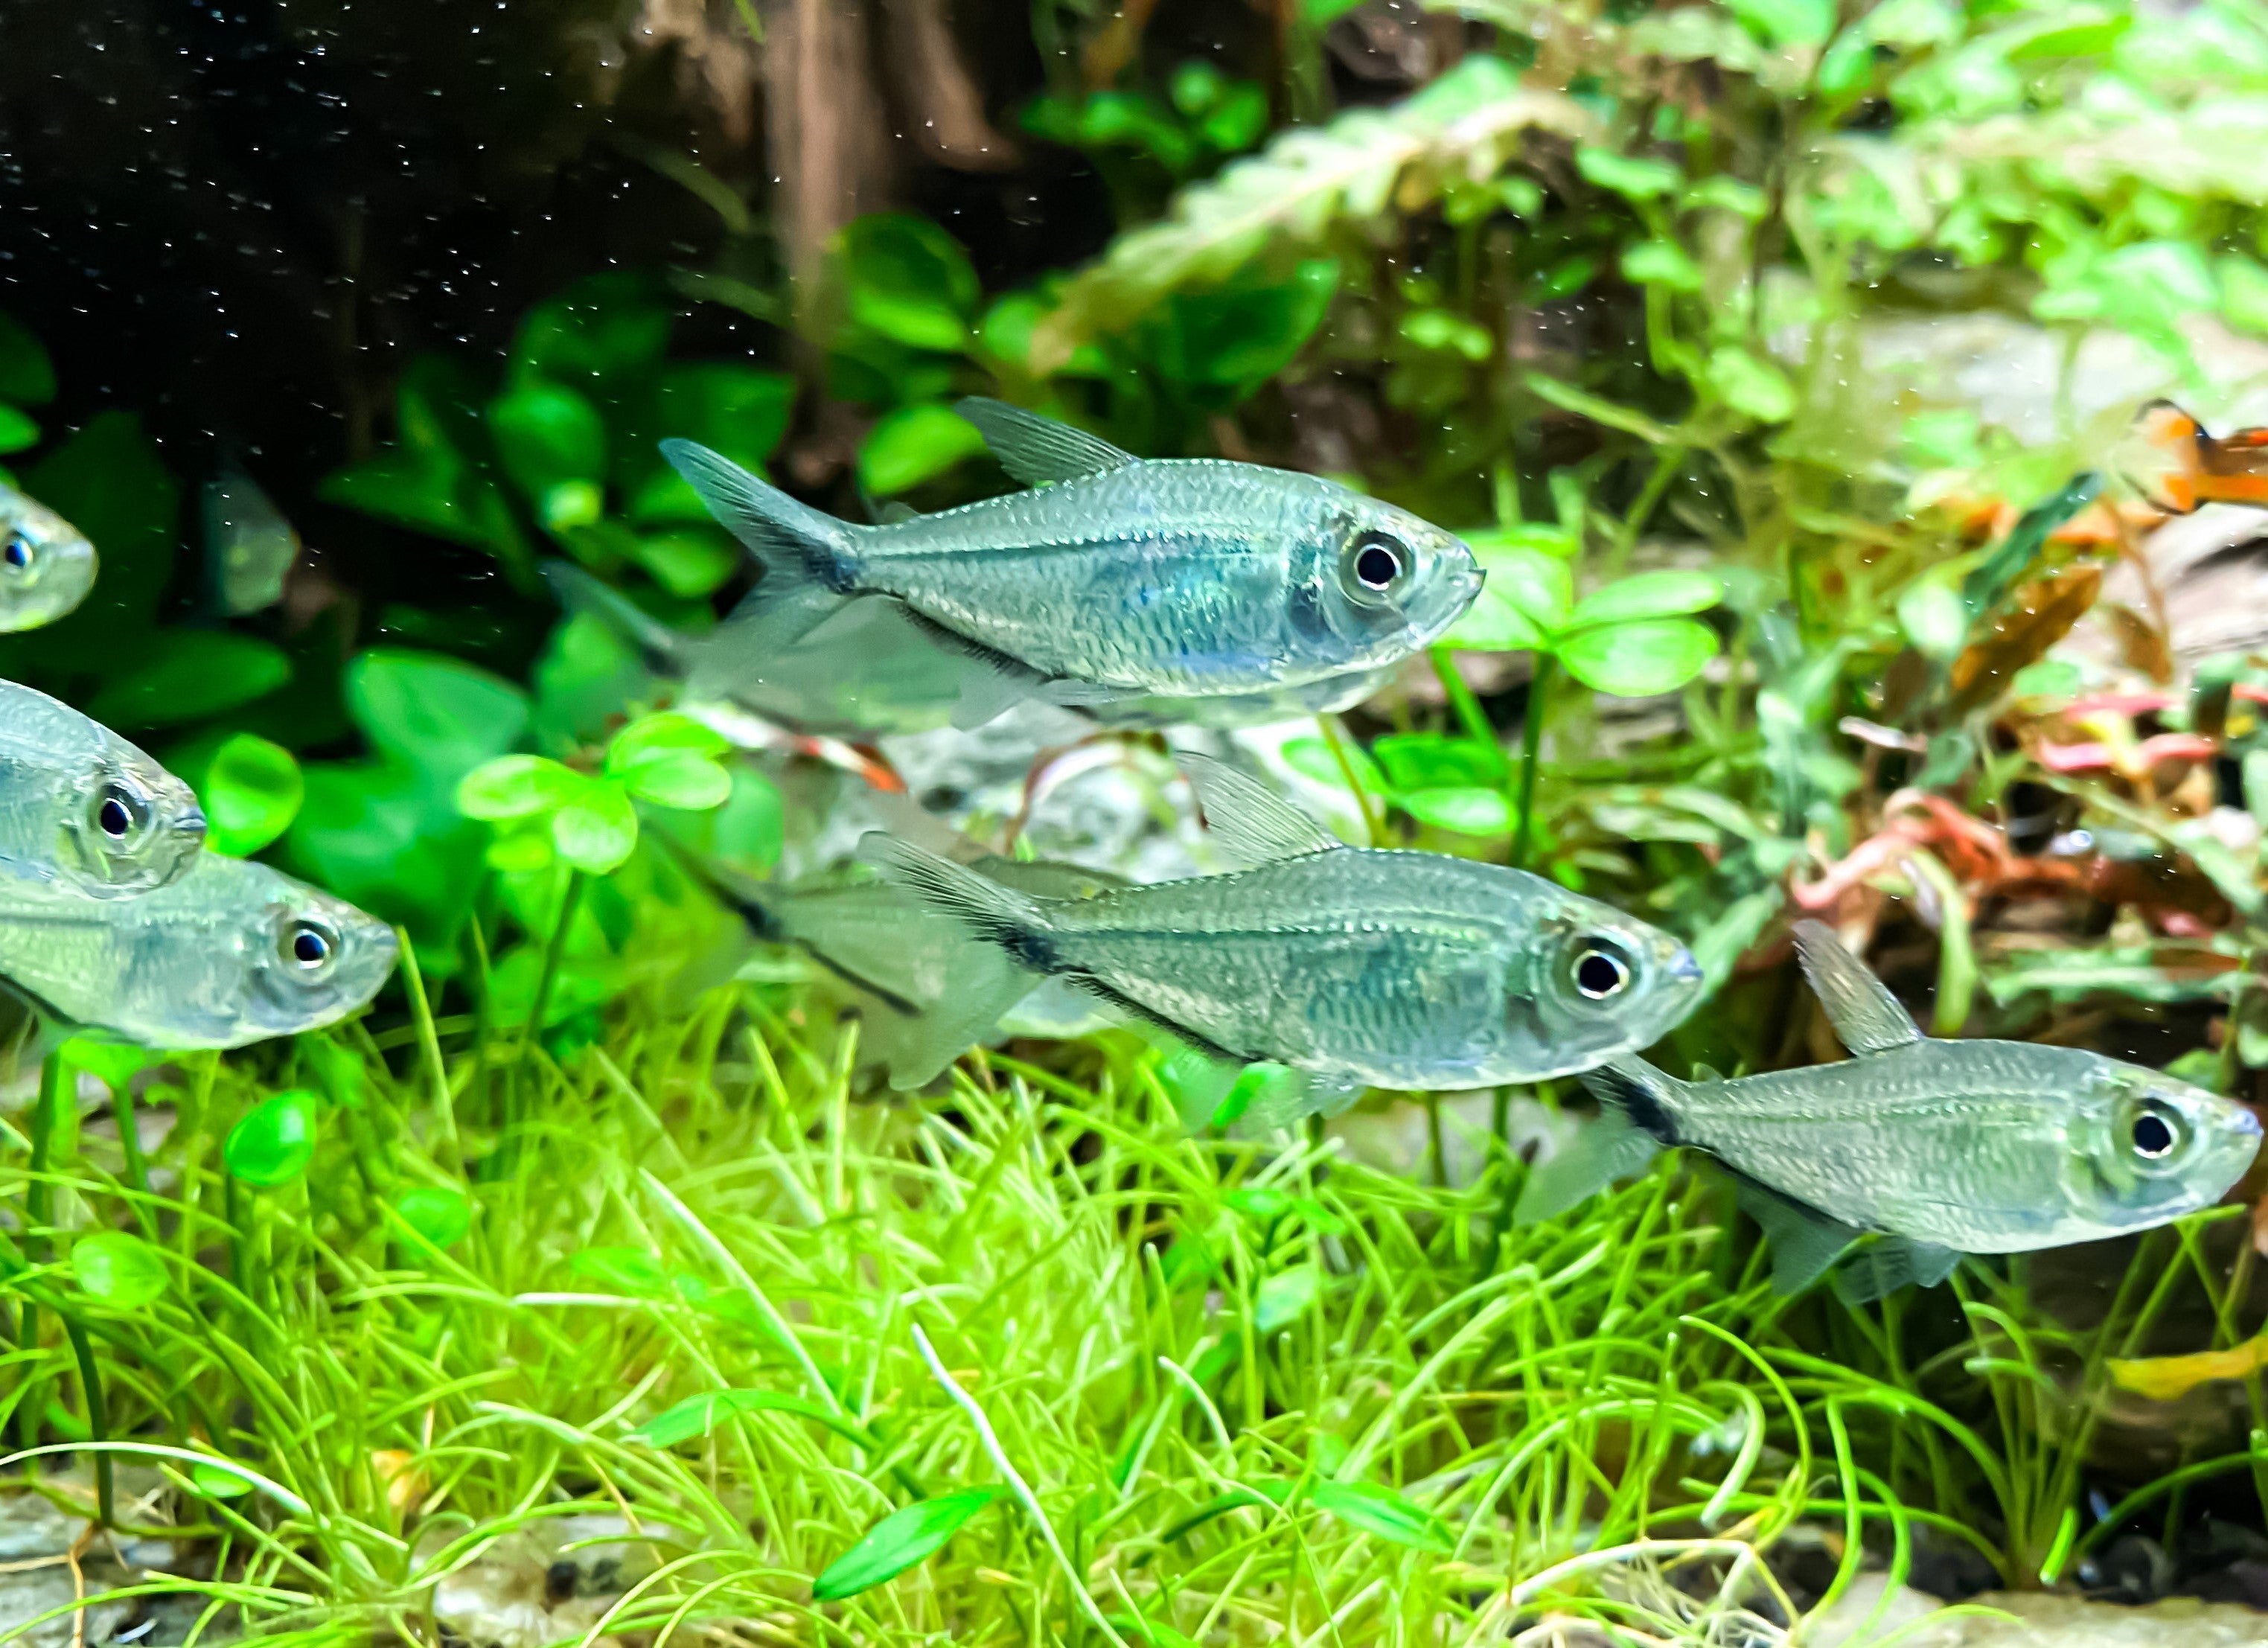 Black line tetra in planted tank